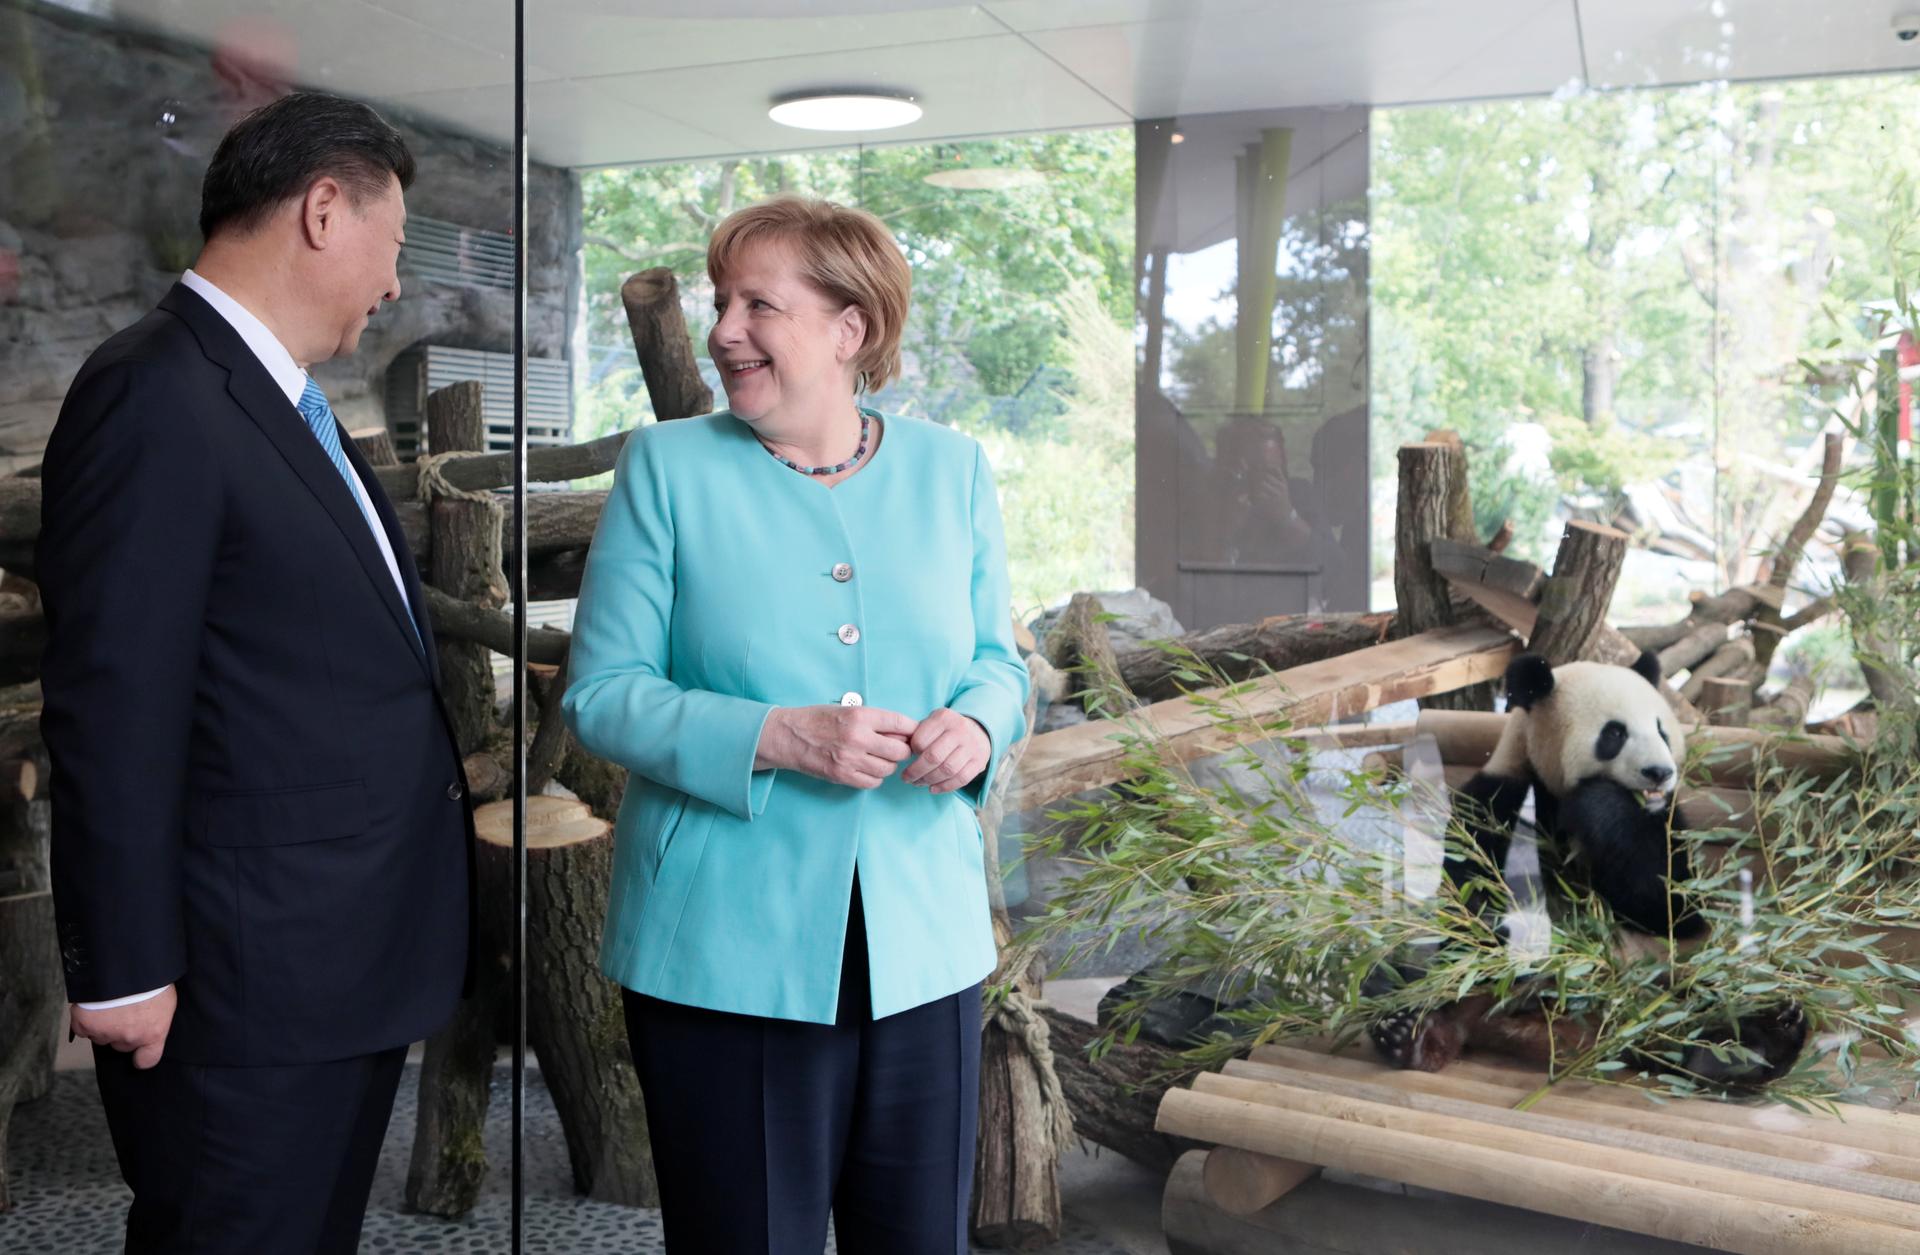 German Chancellor Angela Merkel and Chinese President Xi Jinping attend a welcome ceremony for Chinese panda bears Meng Meng and Jiao Qing at the Zoo in Berlin, Germany July 5, 2017.